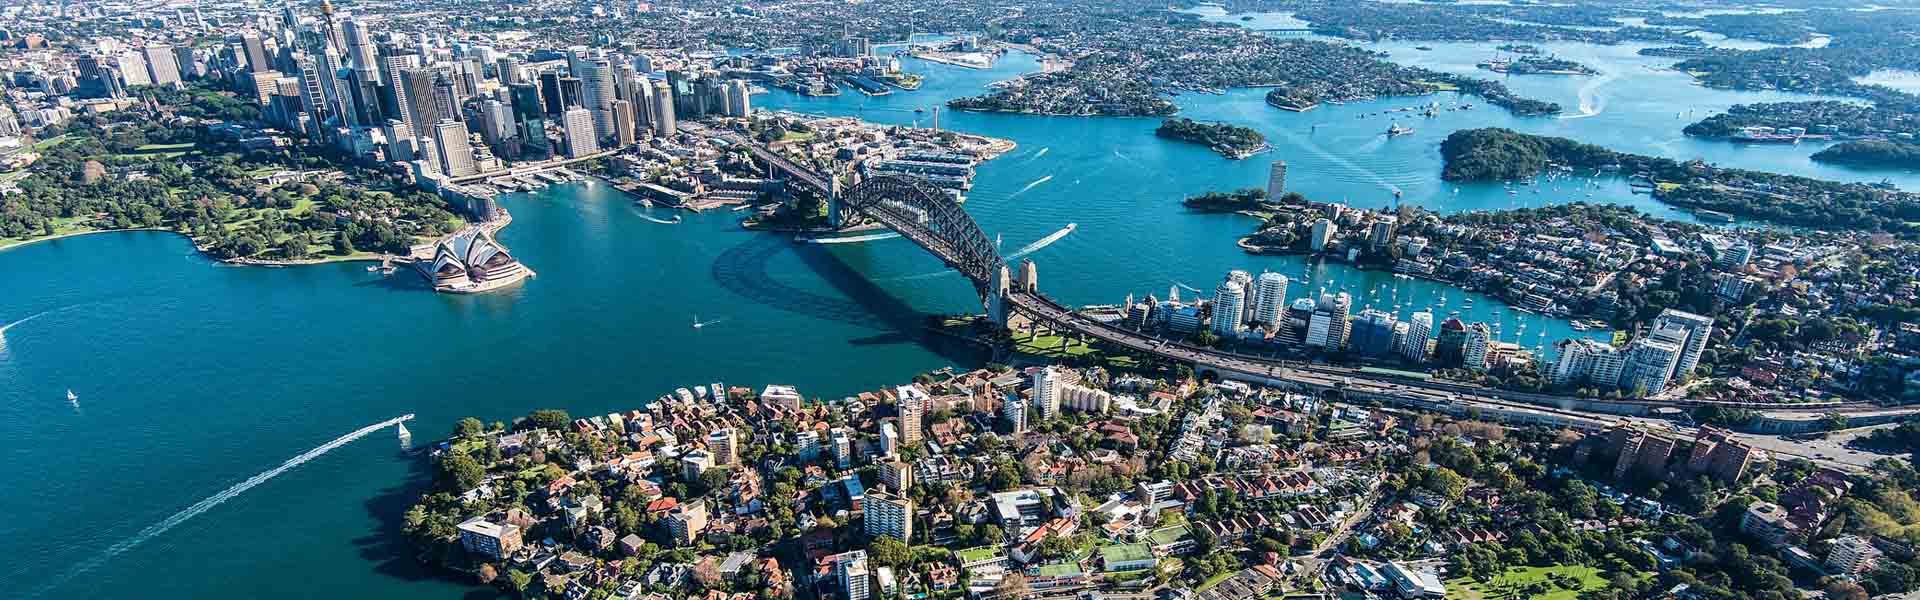 An alternative guide to Sydney